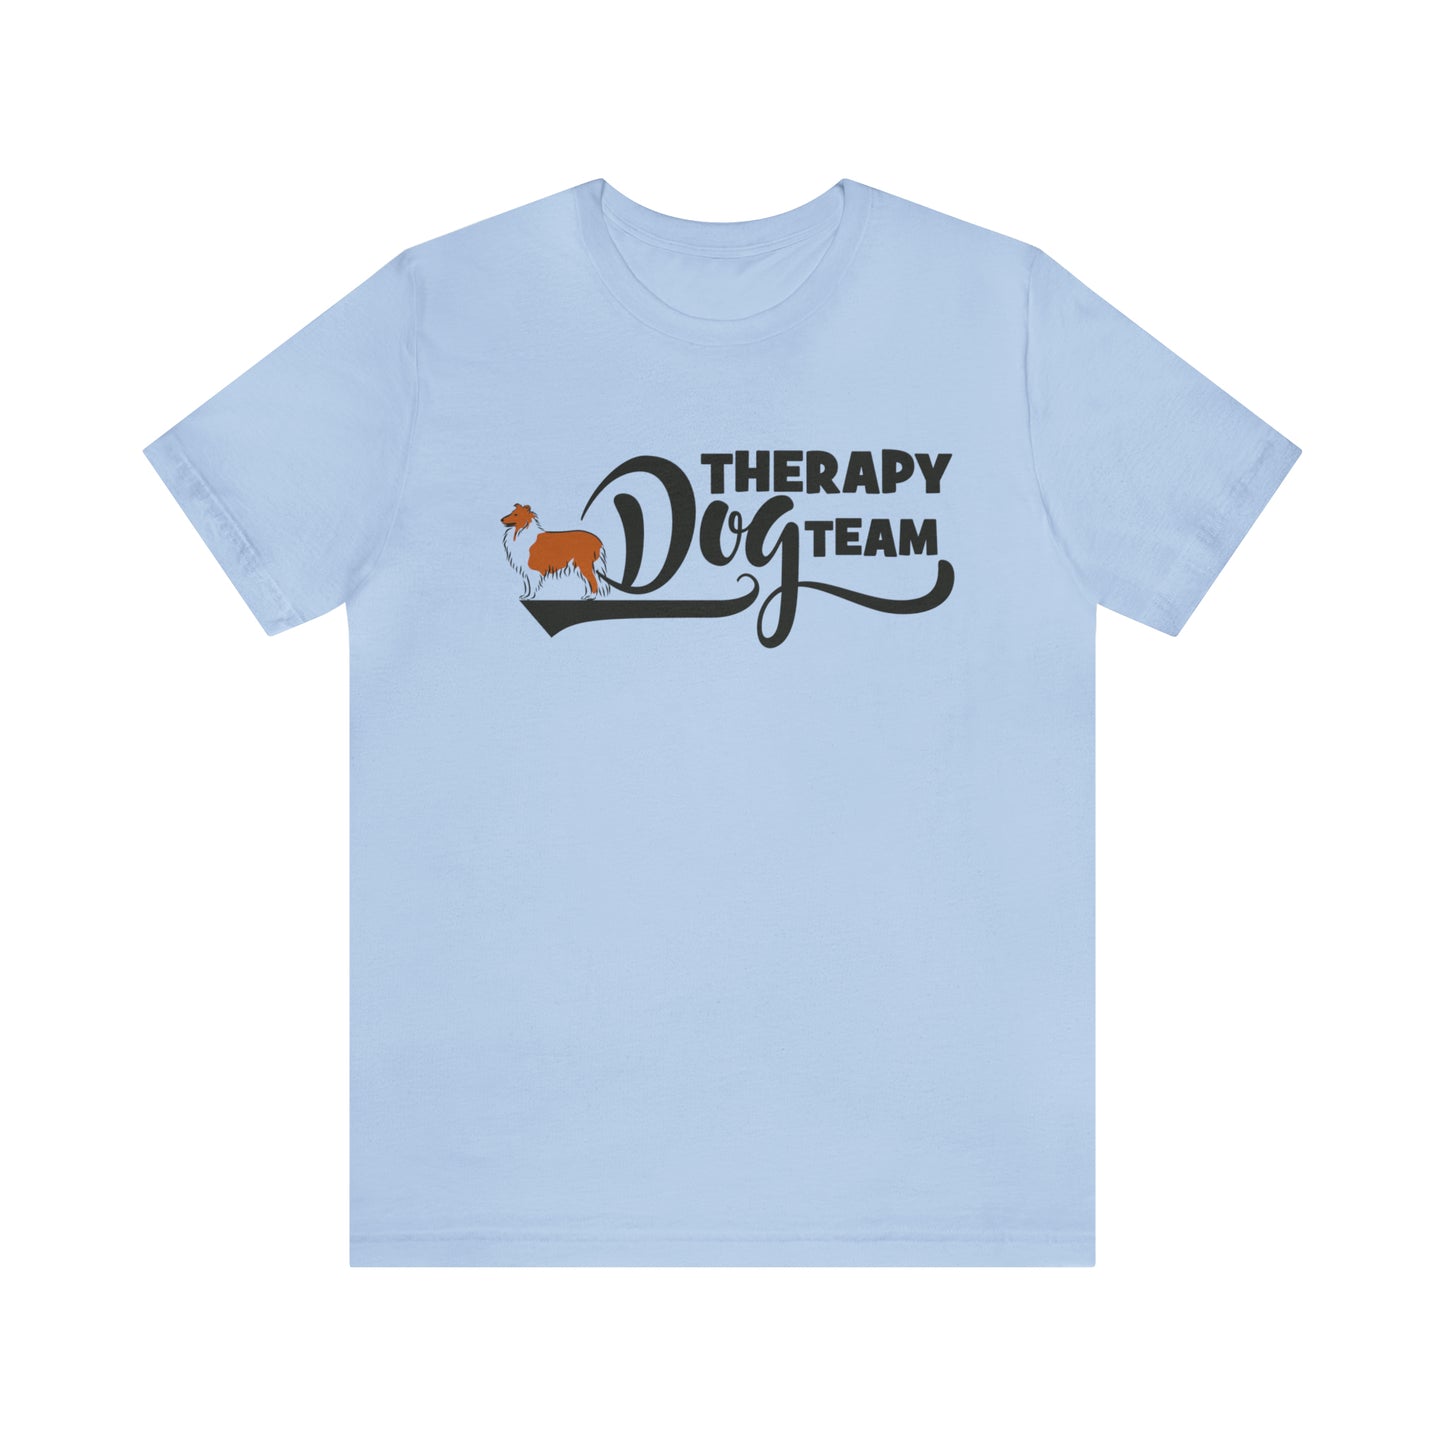 THERAPY DOG TEAM - ROUGH COLLIE   -  Unisex Short Sleeve Tee